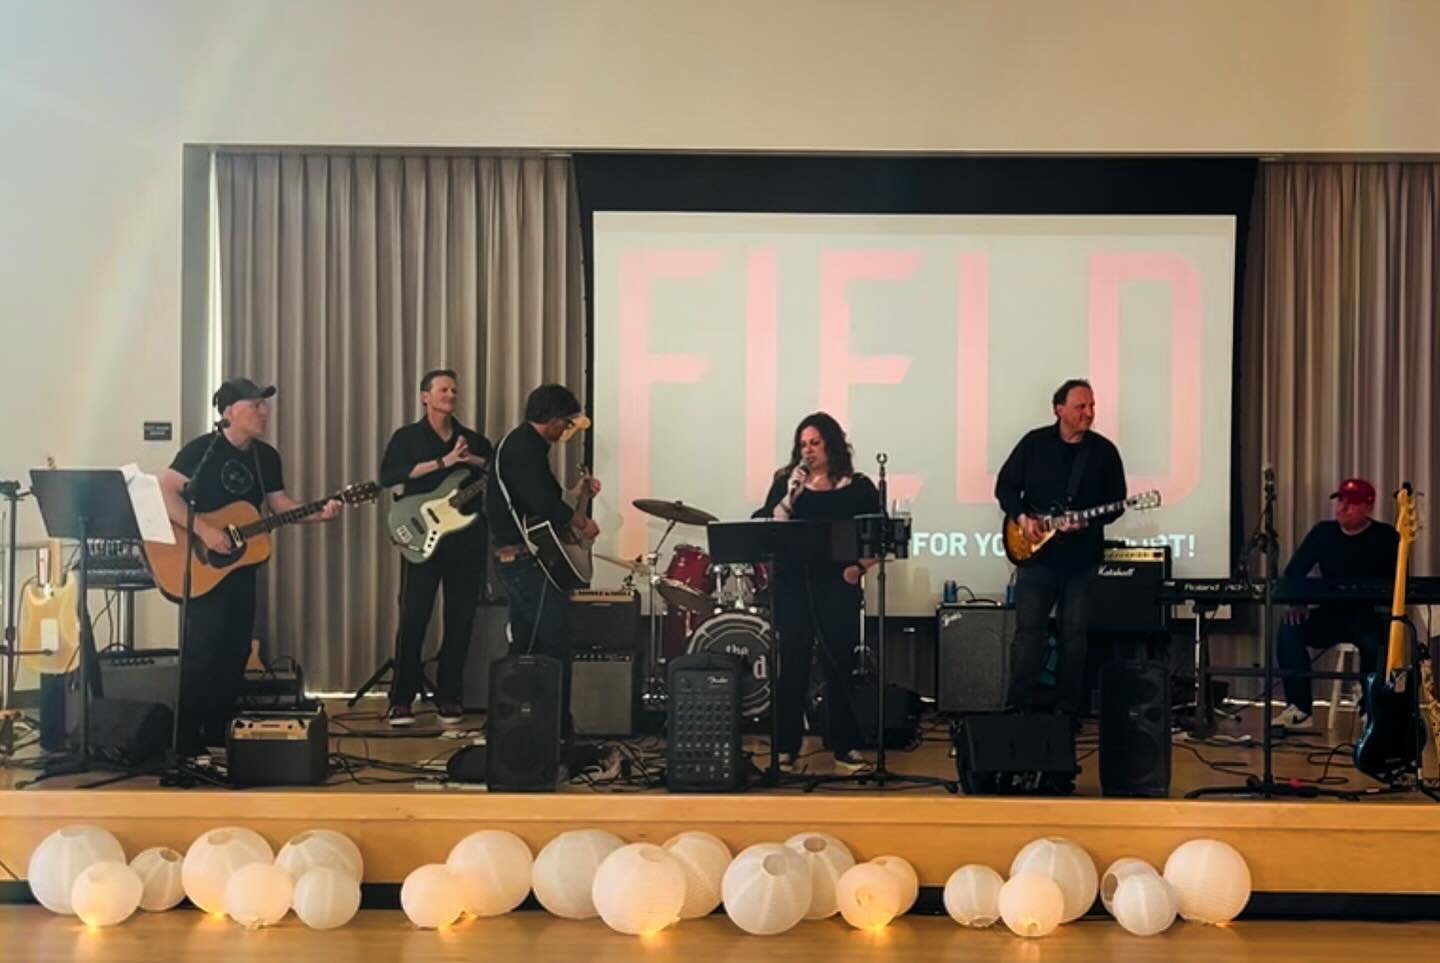 Dancing, dining, celebrating &mdash; and raising funds for a great cause. Thank you @fieldmiddlepeninsula for inviting us to be a part of your wonderful event. 🎸 🎶